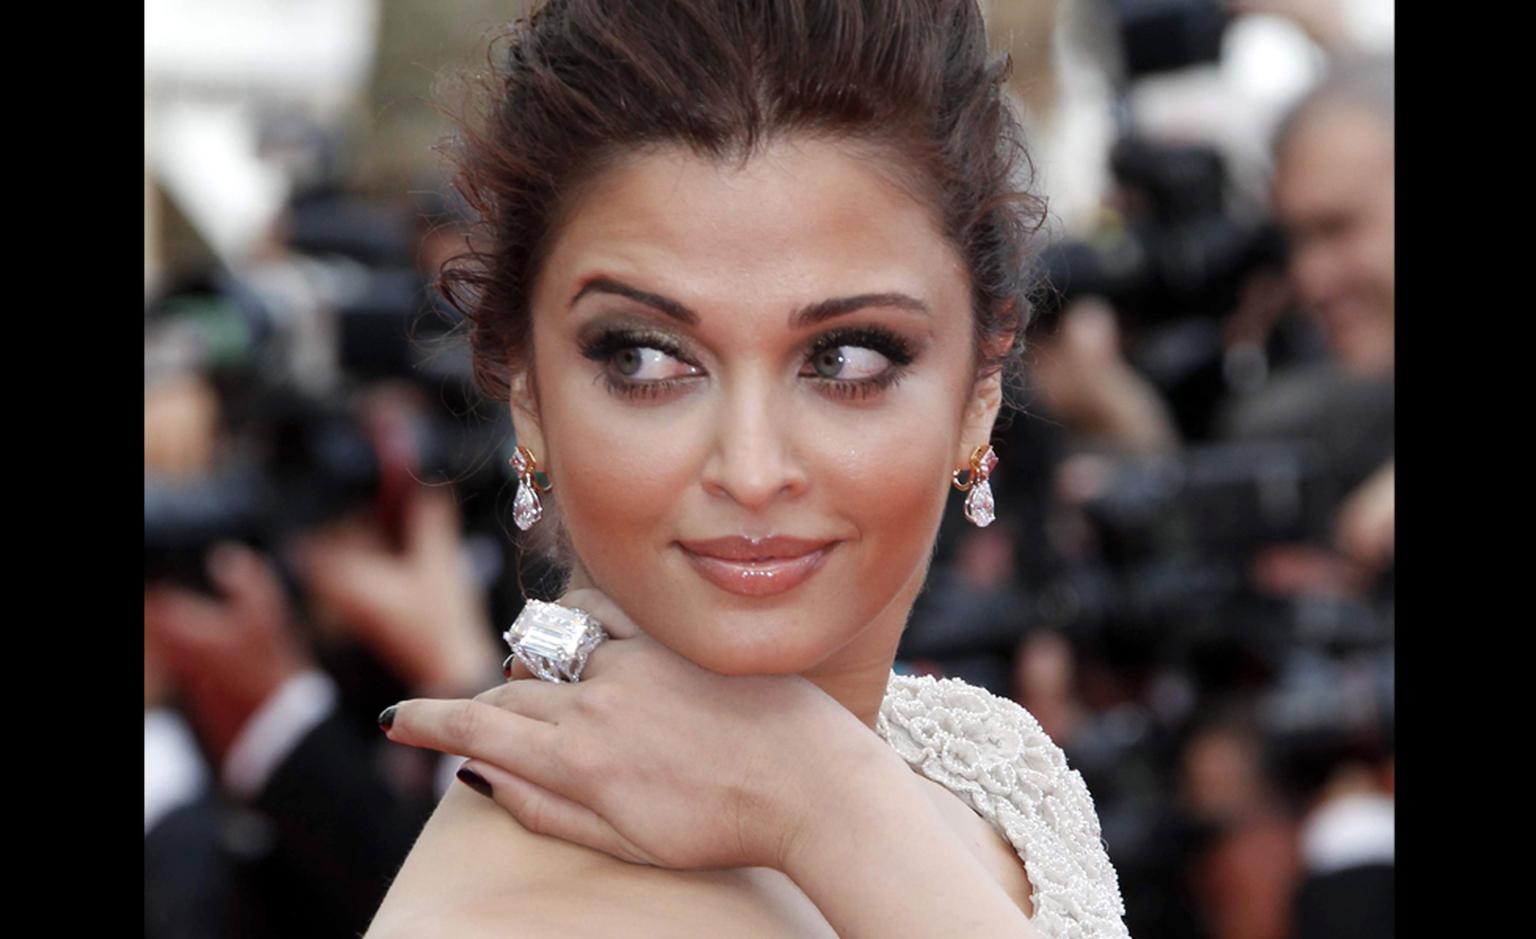 Aishwarya Rai knows how to wear a 53 carat diamond ring with style and poses for the cameras on the red carpet at the Cannes Film Festival 2011. The ring and earrings are both by Chopard.